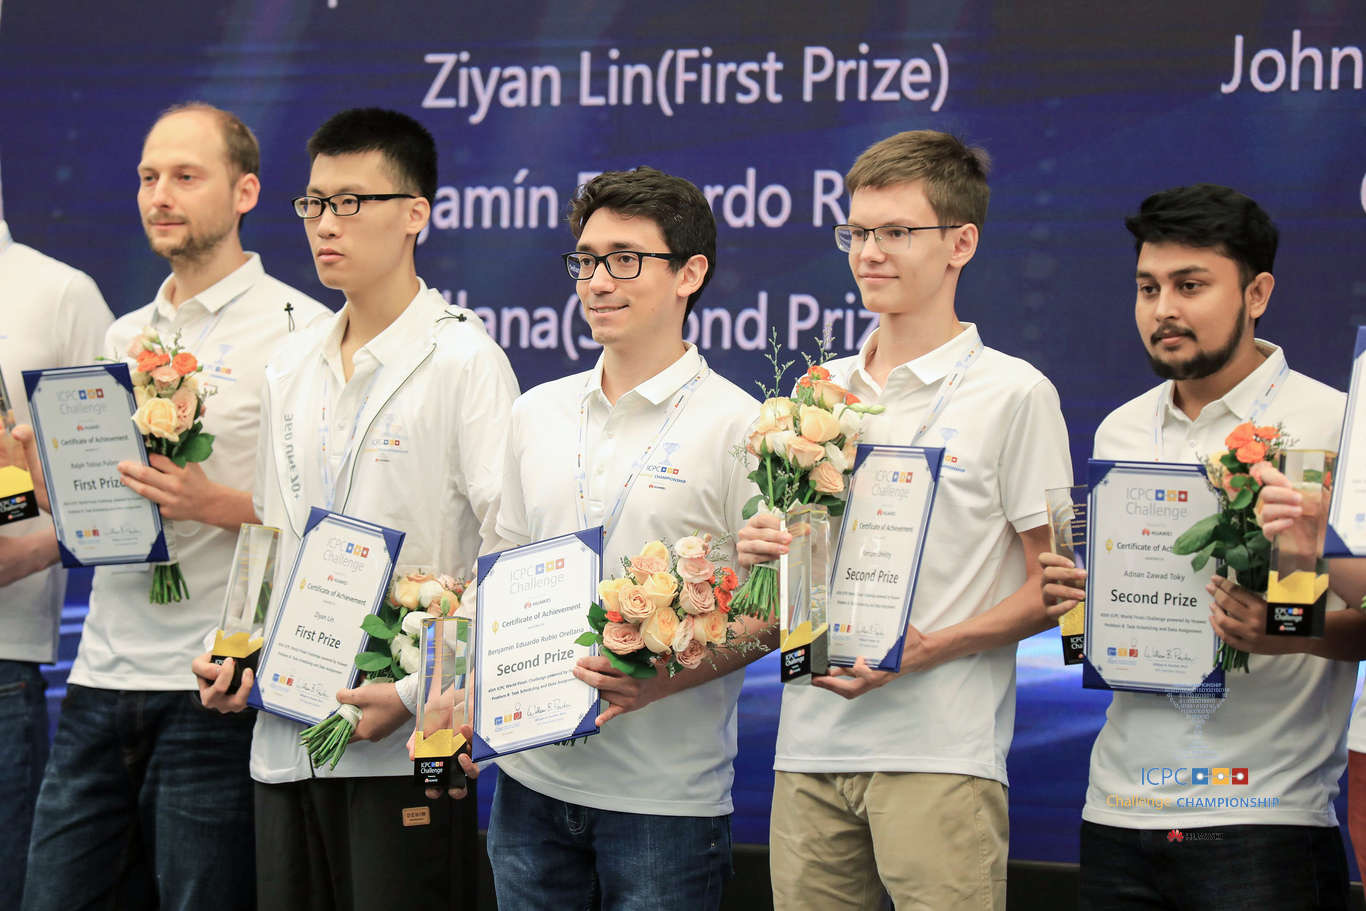 From RUET to Global Stage: Adnan Zawad Toky's Triumph at ICPC World Finals